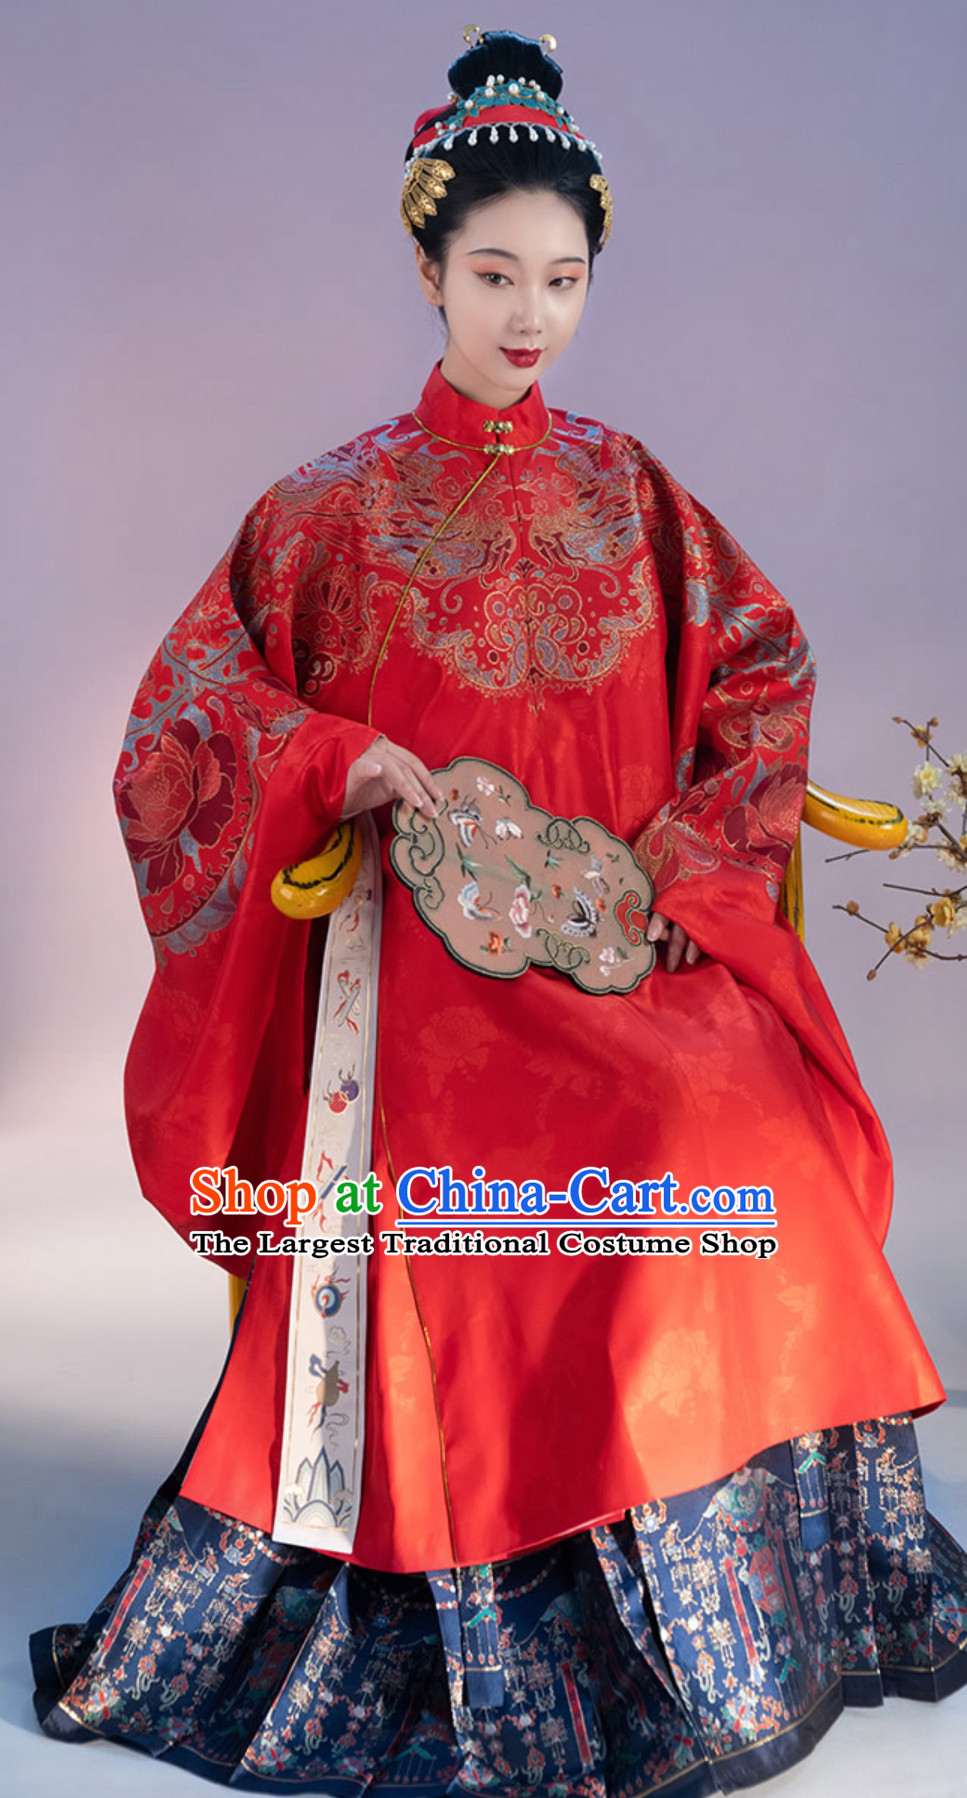 Top Red Chinese Ancient Imperial Wedding Dress Ming Dynasty Queen Clothing for Women